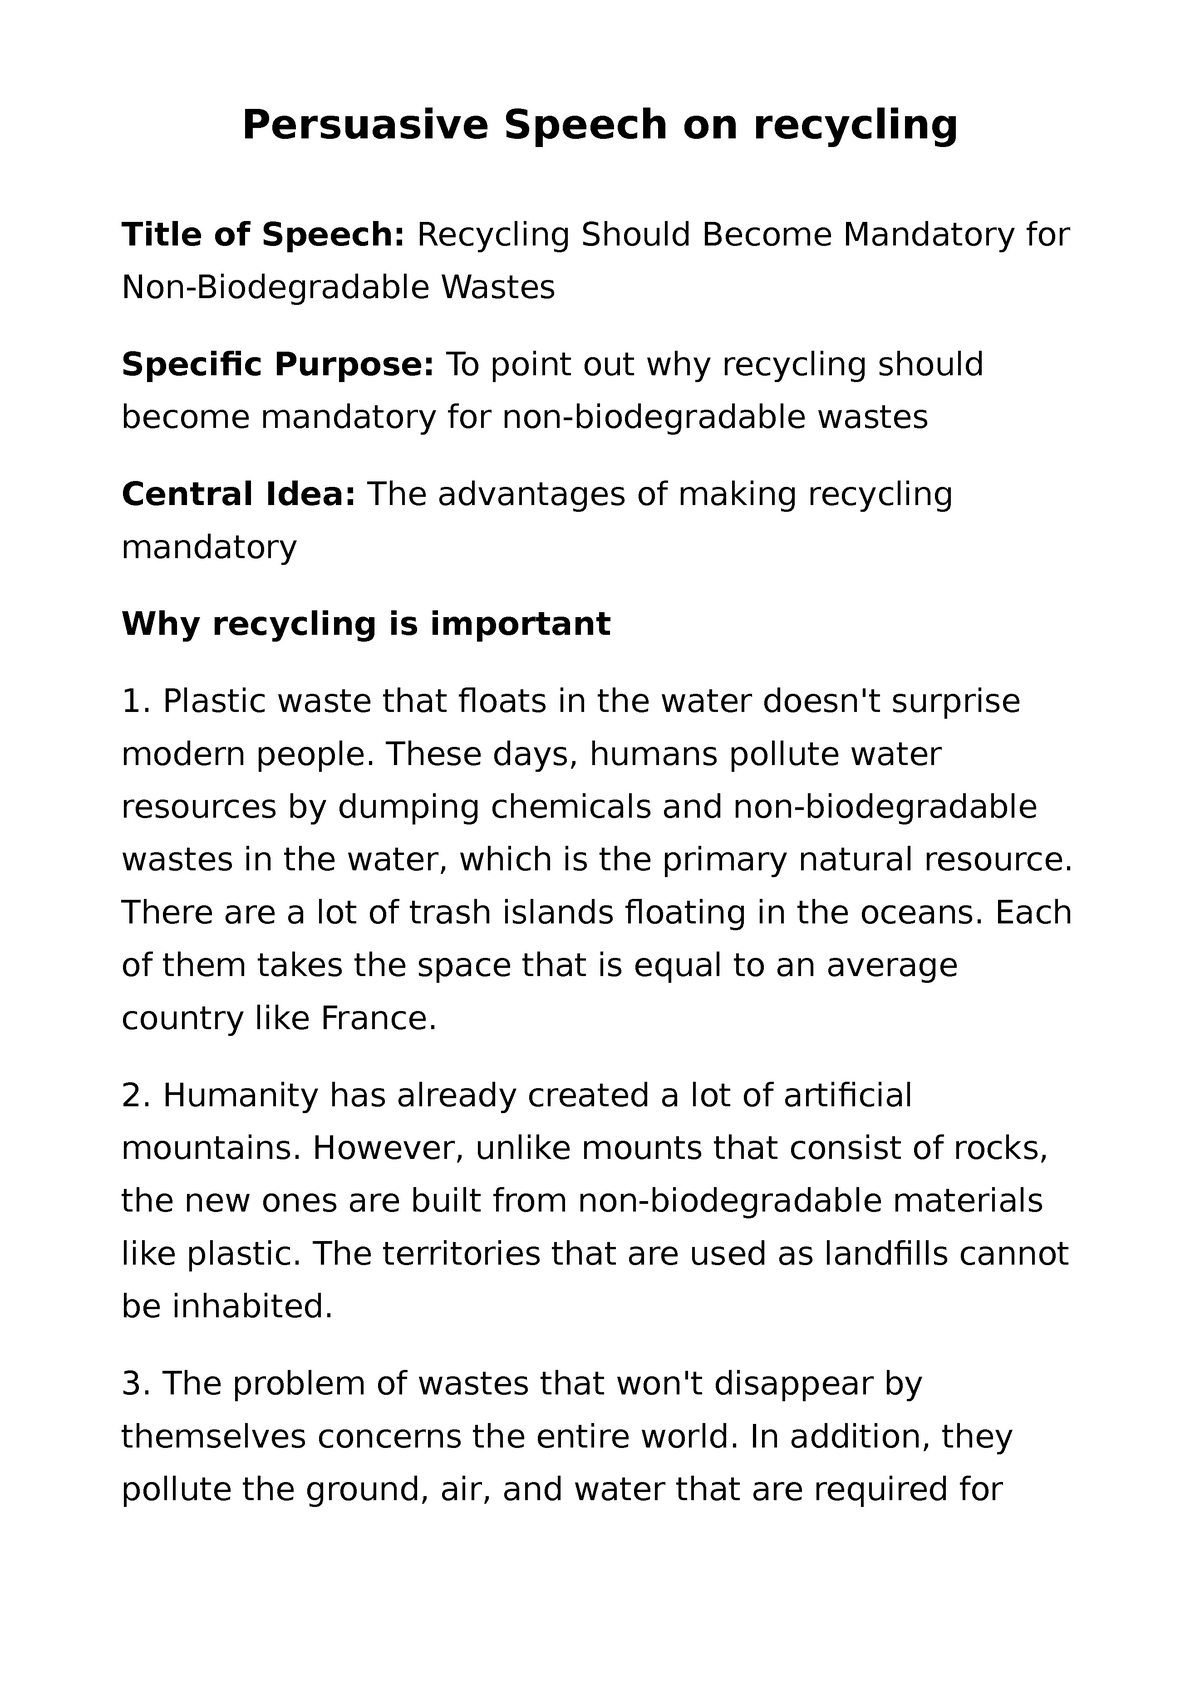 speech on recycling and its importance